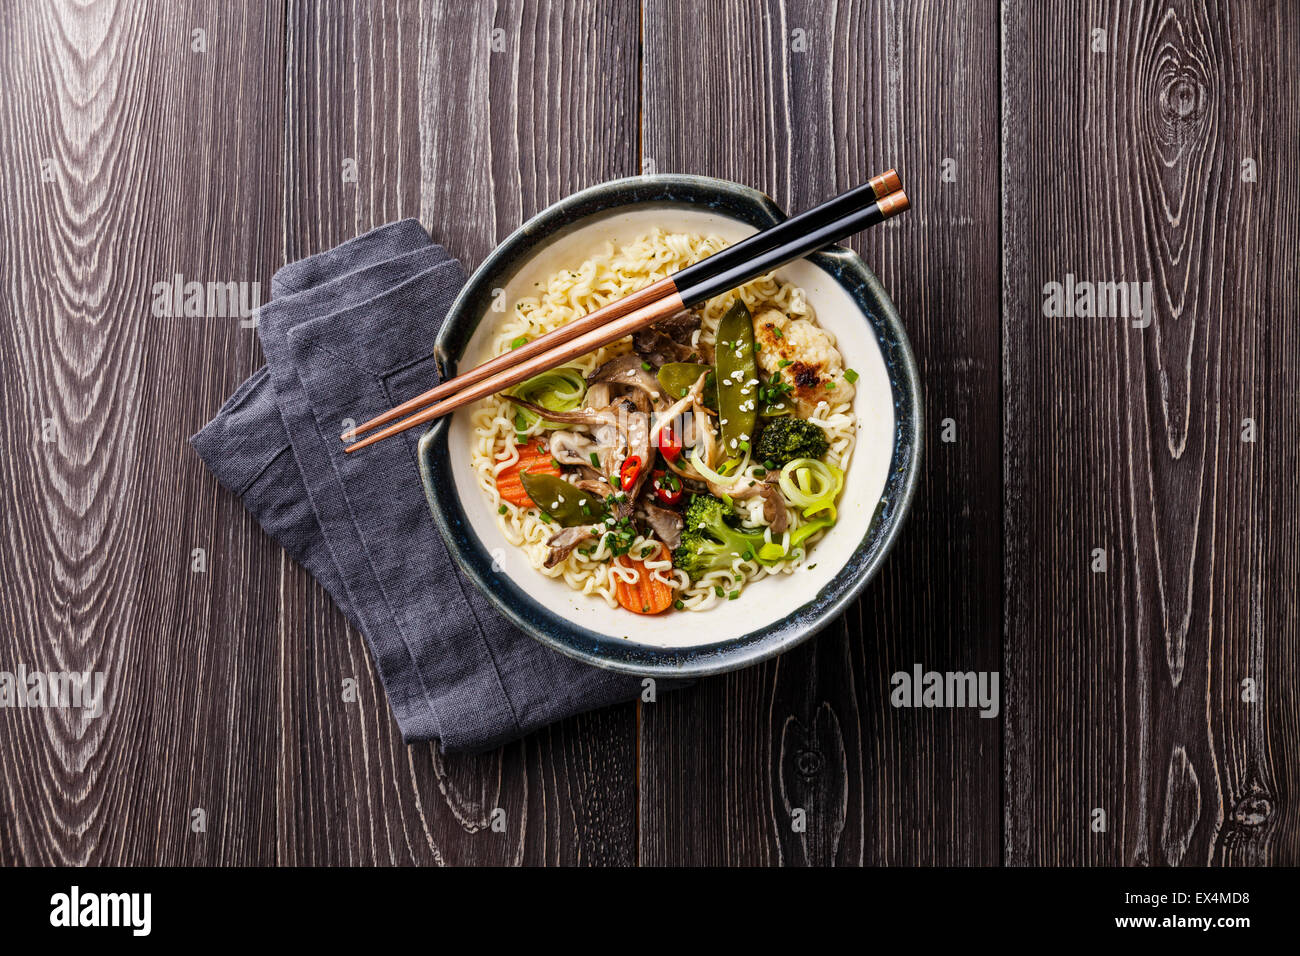 Asian noodles with oyster mushrooms and vegetables in bowl on gray wooden background Stock Photo